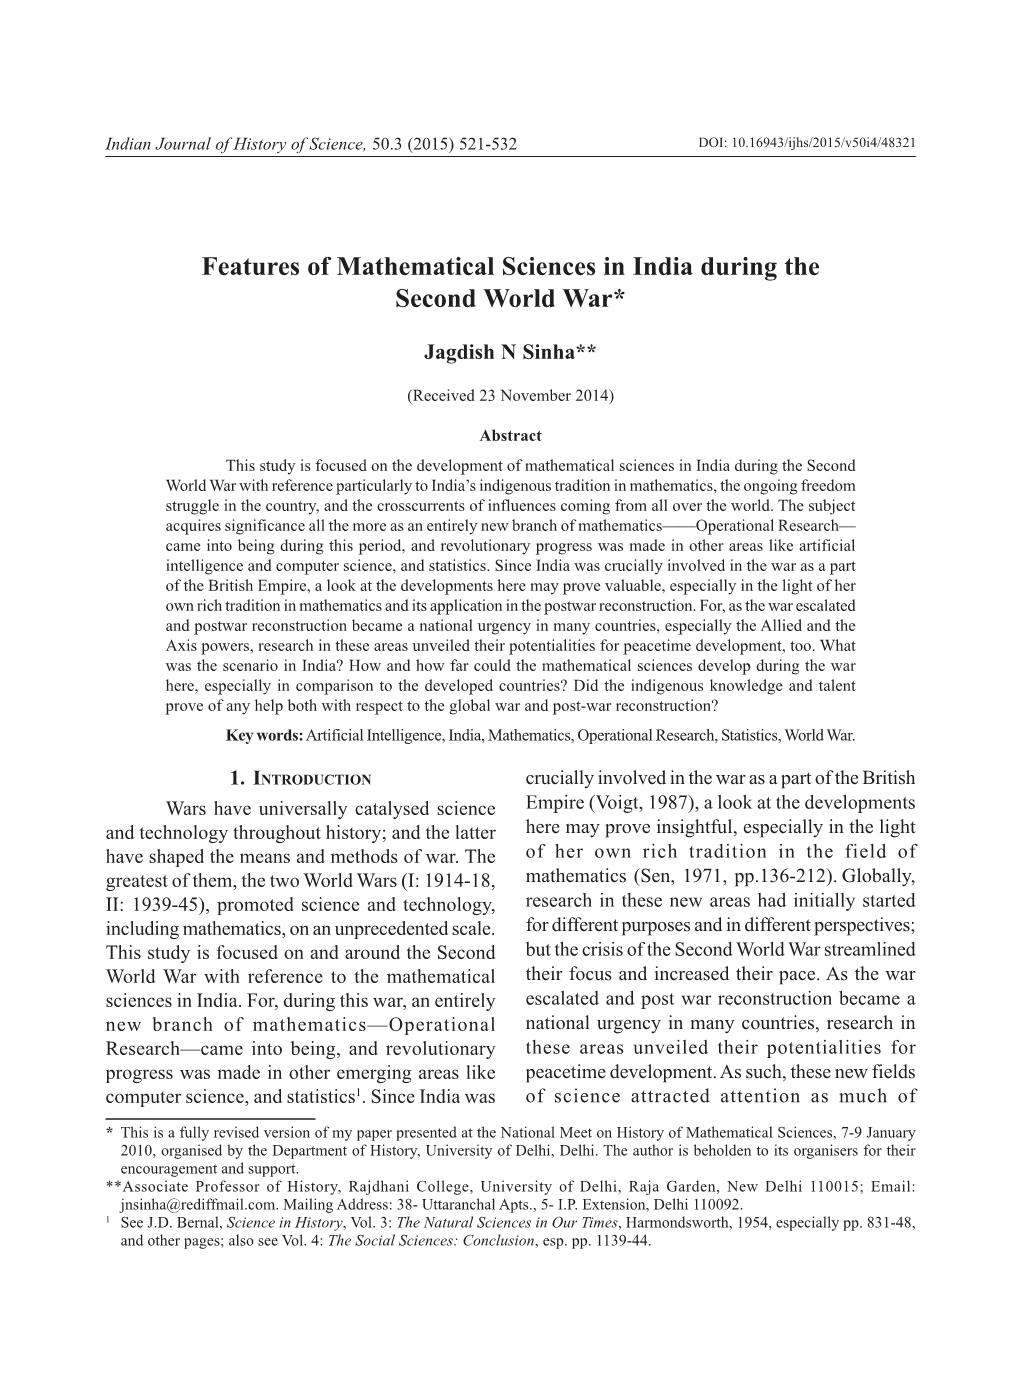 Features of Mathematical Sciences in India During the Second World War*